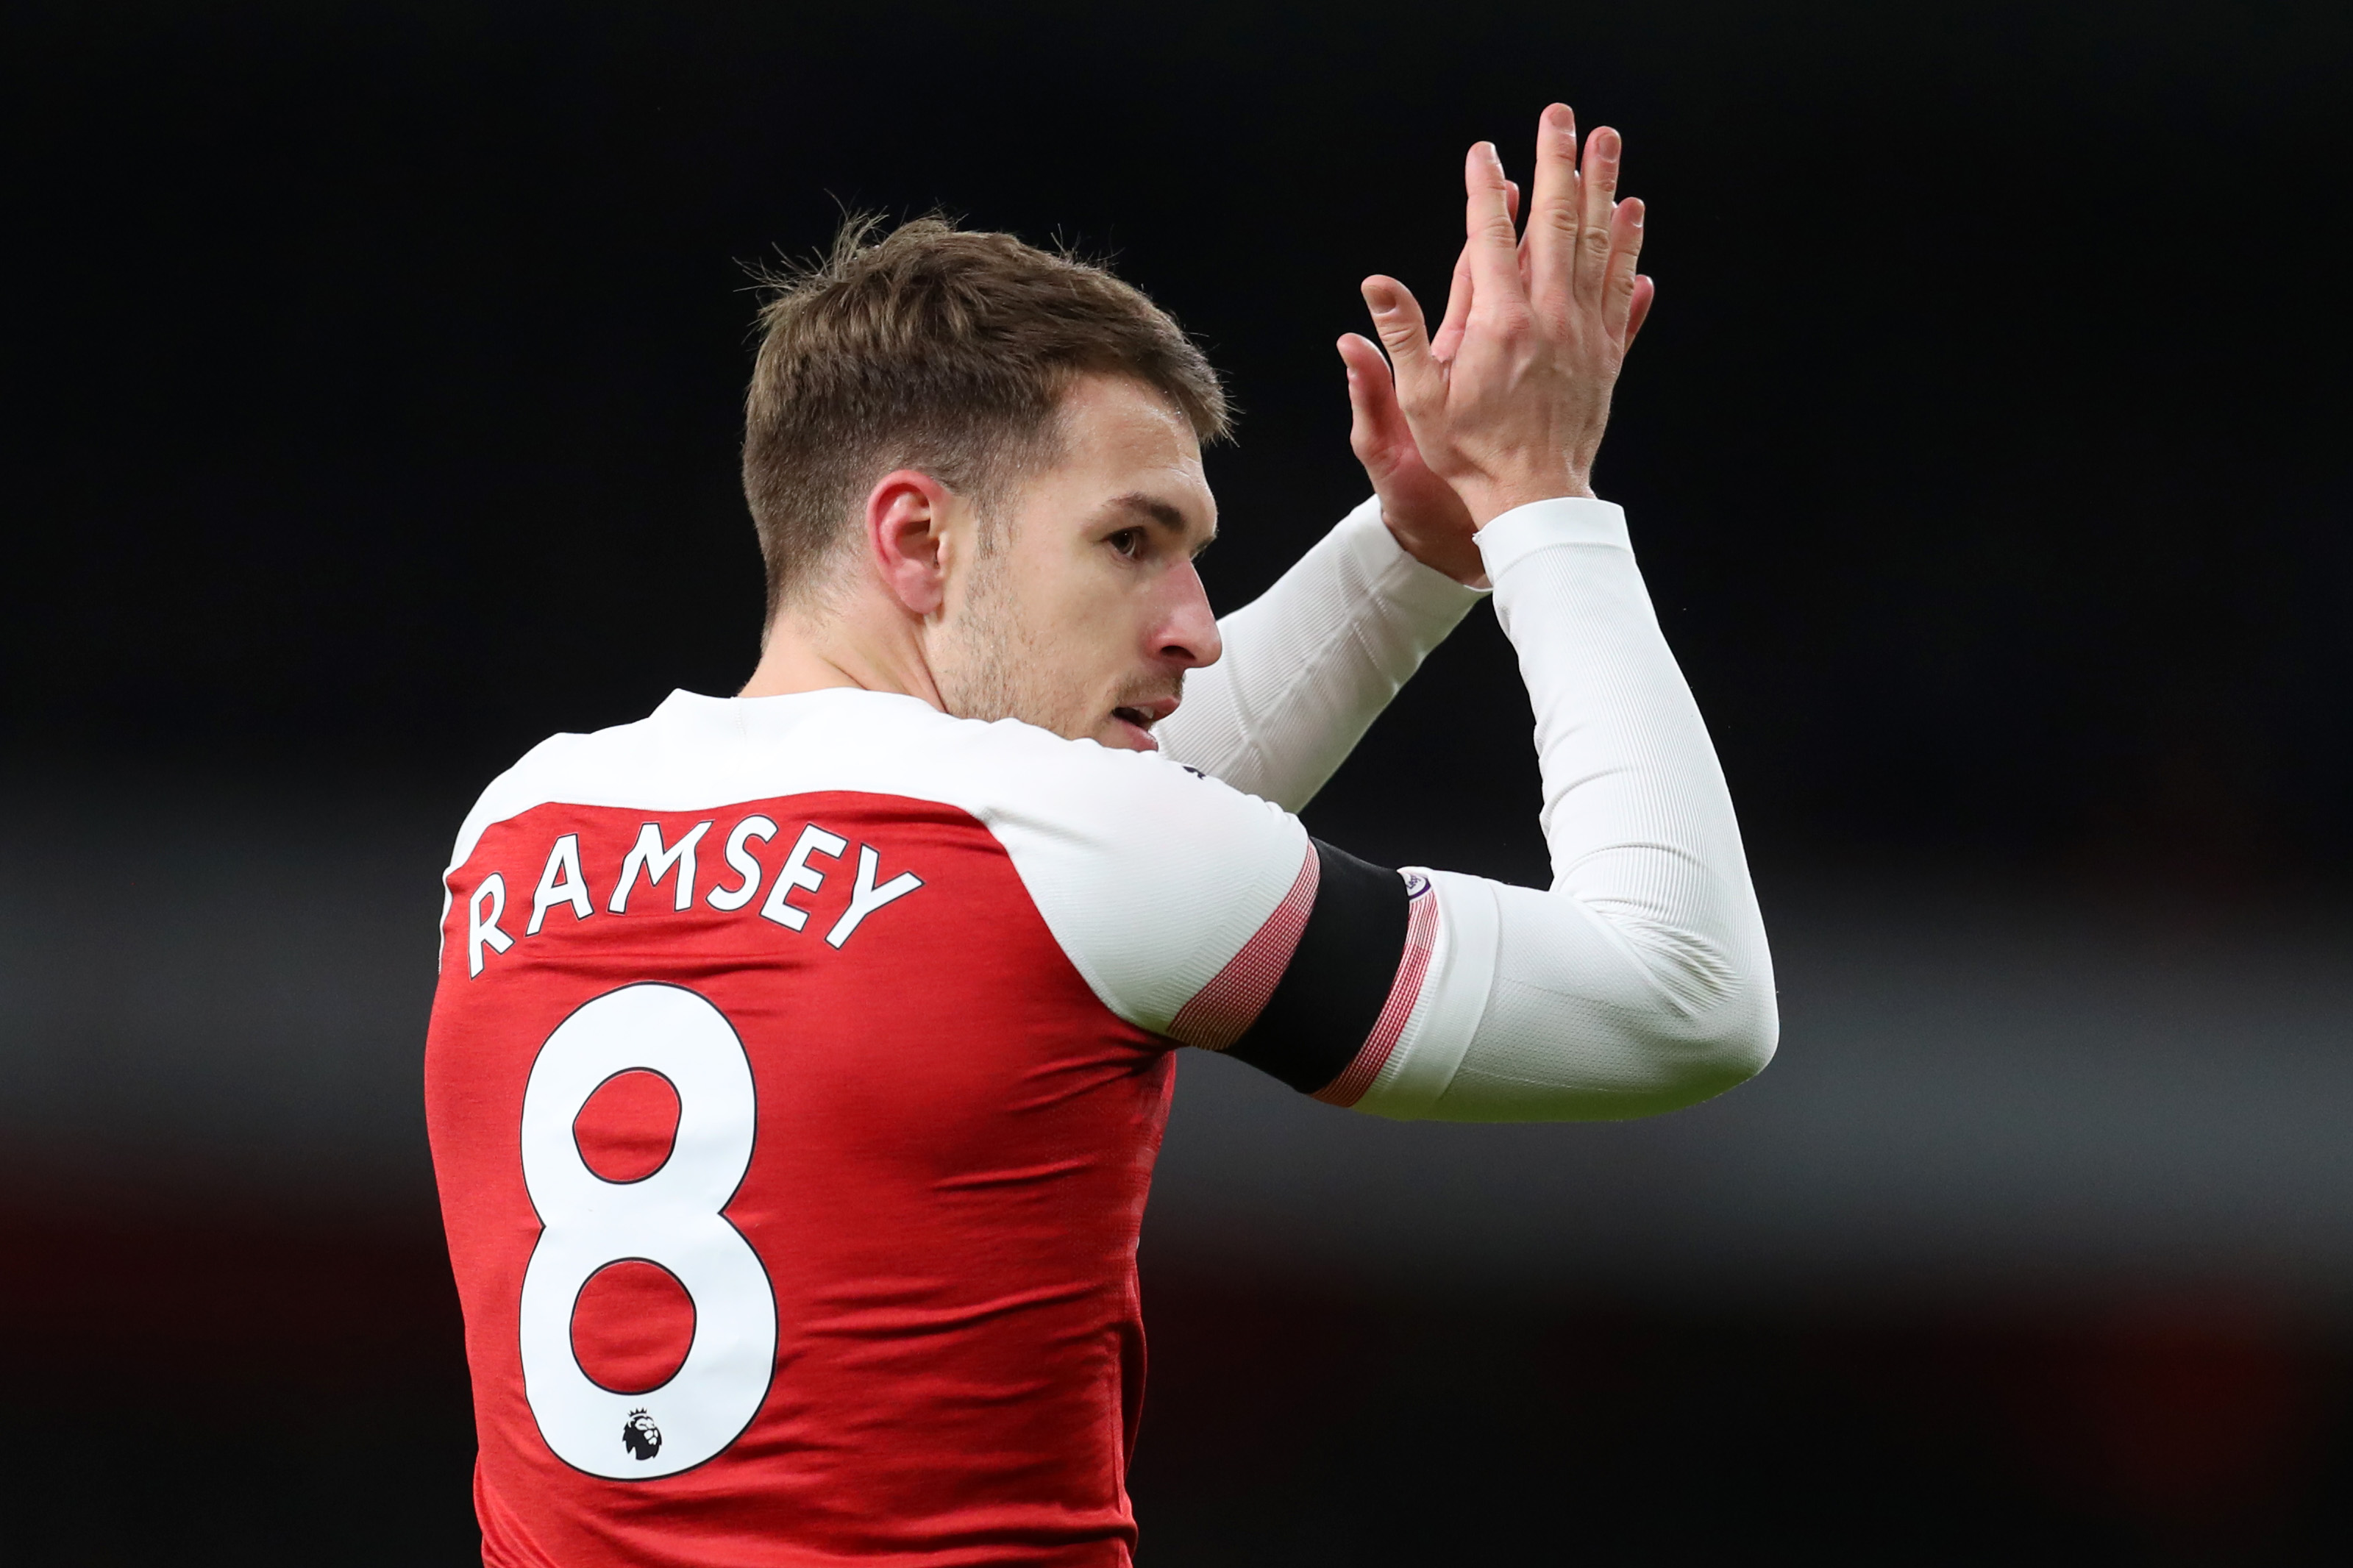 LONDON, ENGLAND - JANUARY 01:  Aaron Ramsey of Arsenal celebrates after scoring his team's third goal during the Premier League match between Arsenal FC and Fulham FC at Emirates Stadium on January 1, 2019 in London, United Kingdom.  (Photo by Catherine Ivill/Getty Images)